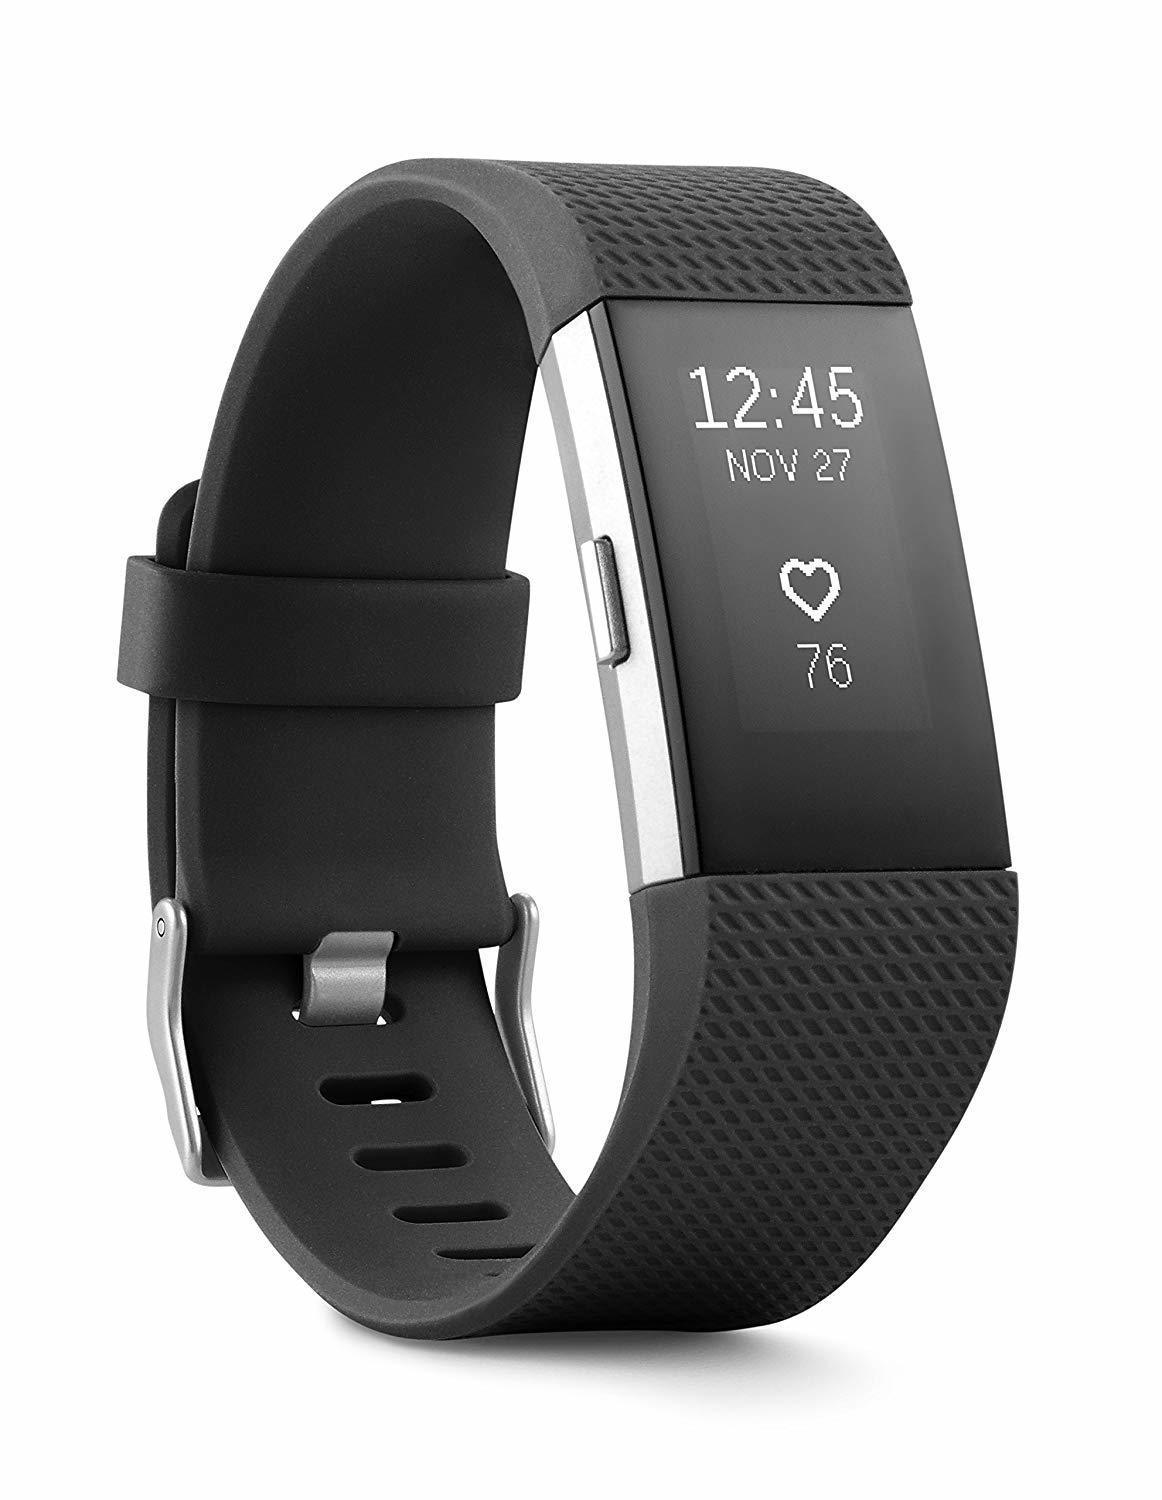 Fitbit Charge 2 - Black - Small - New